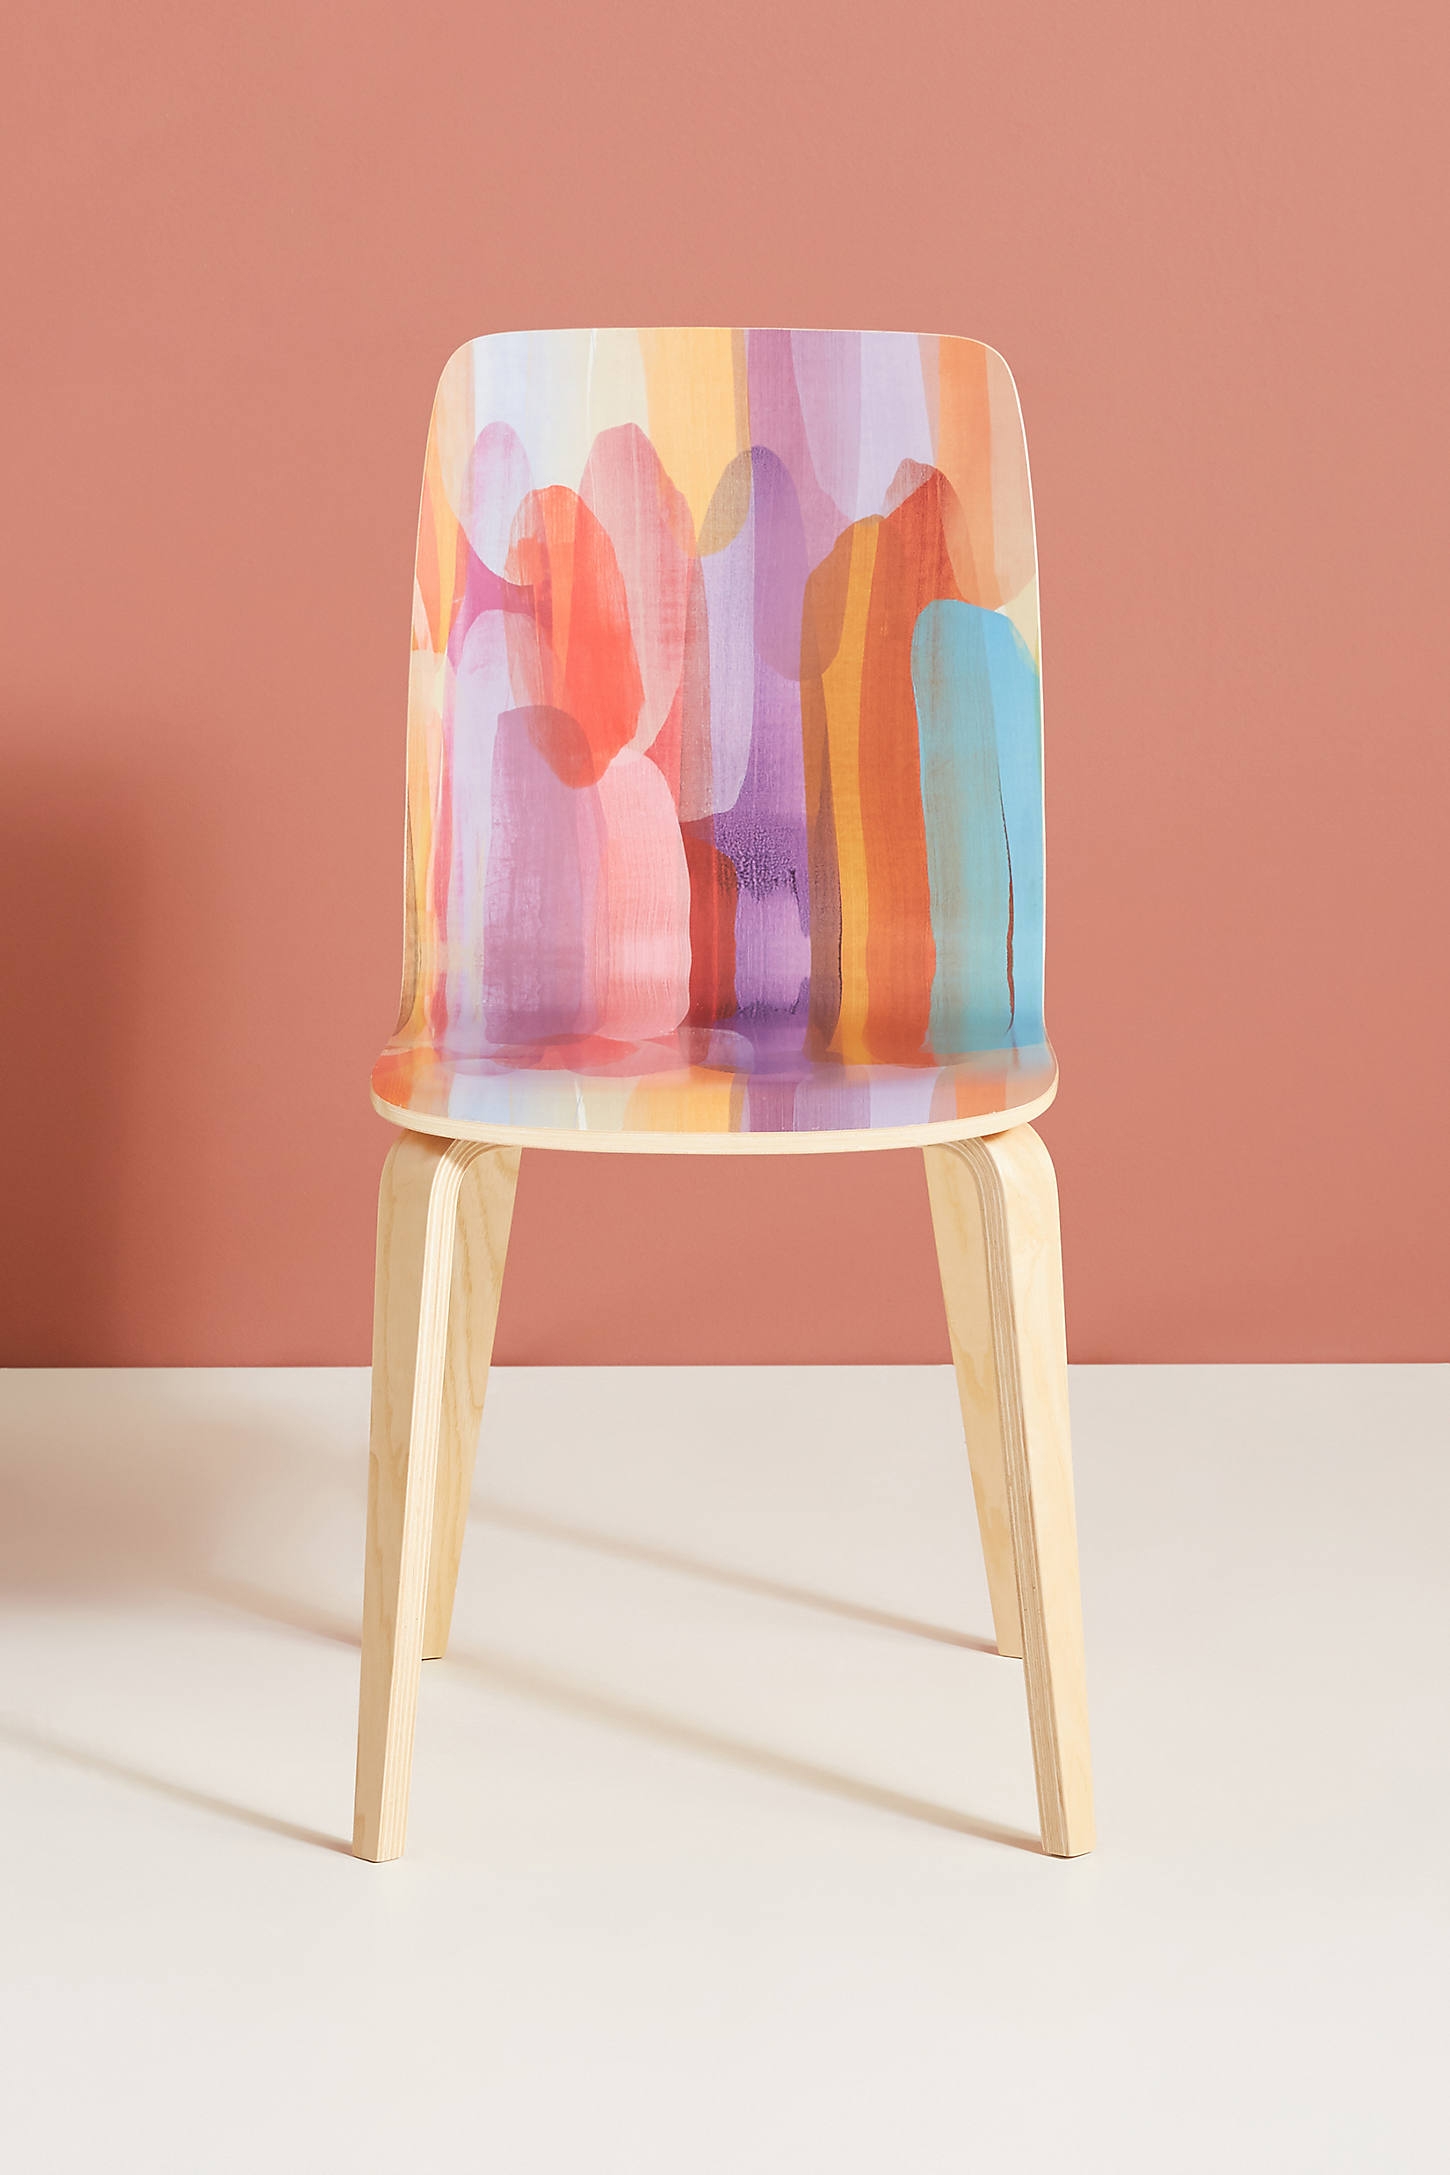 Claire Desjardins Brushstroke Tamsin Dining Chair By Claire Desjardins in Assorted - Image 0